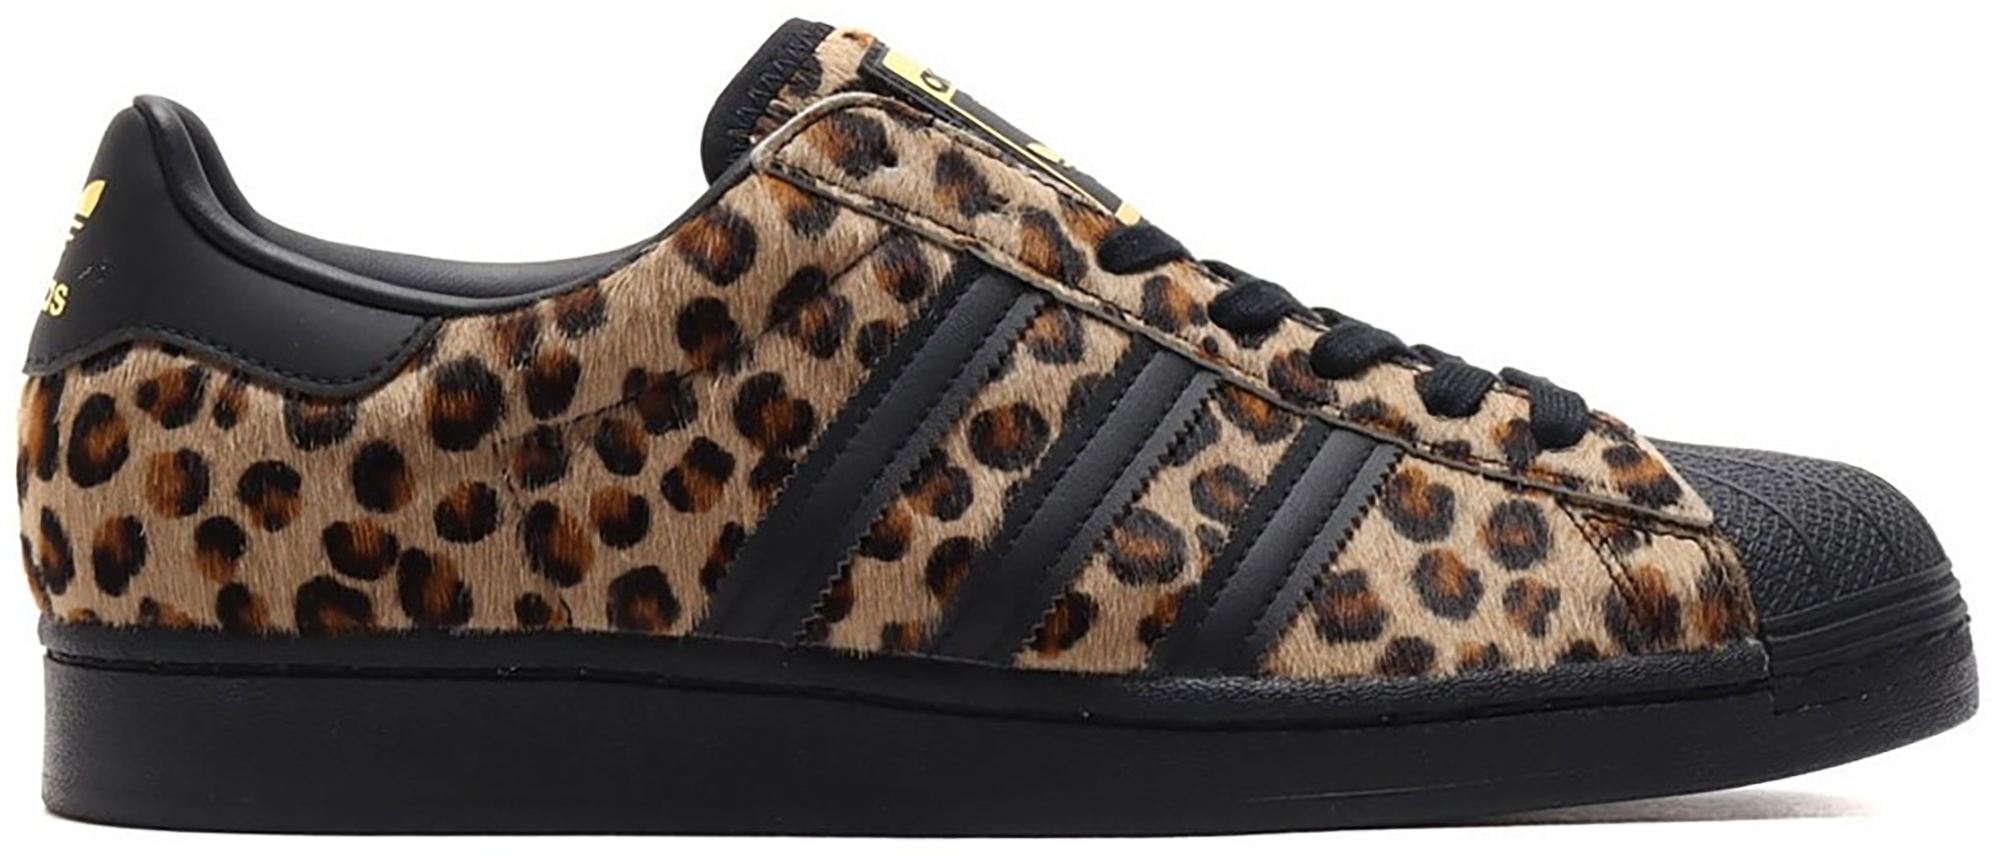 Buy > adidas with leopard stripes > in stock